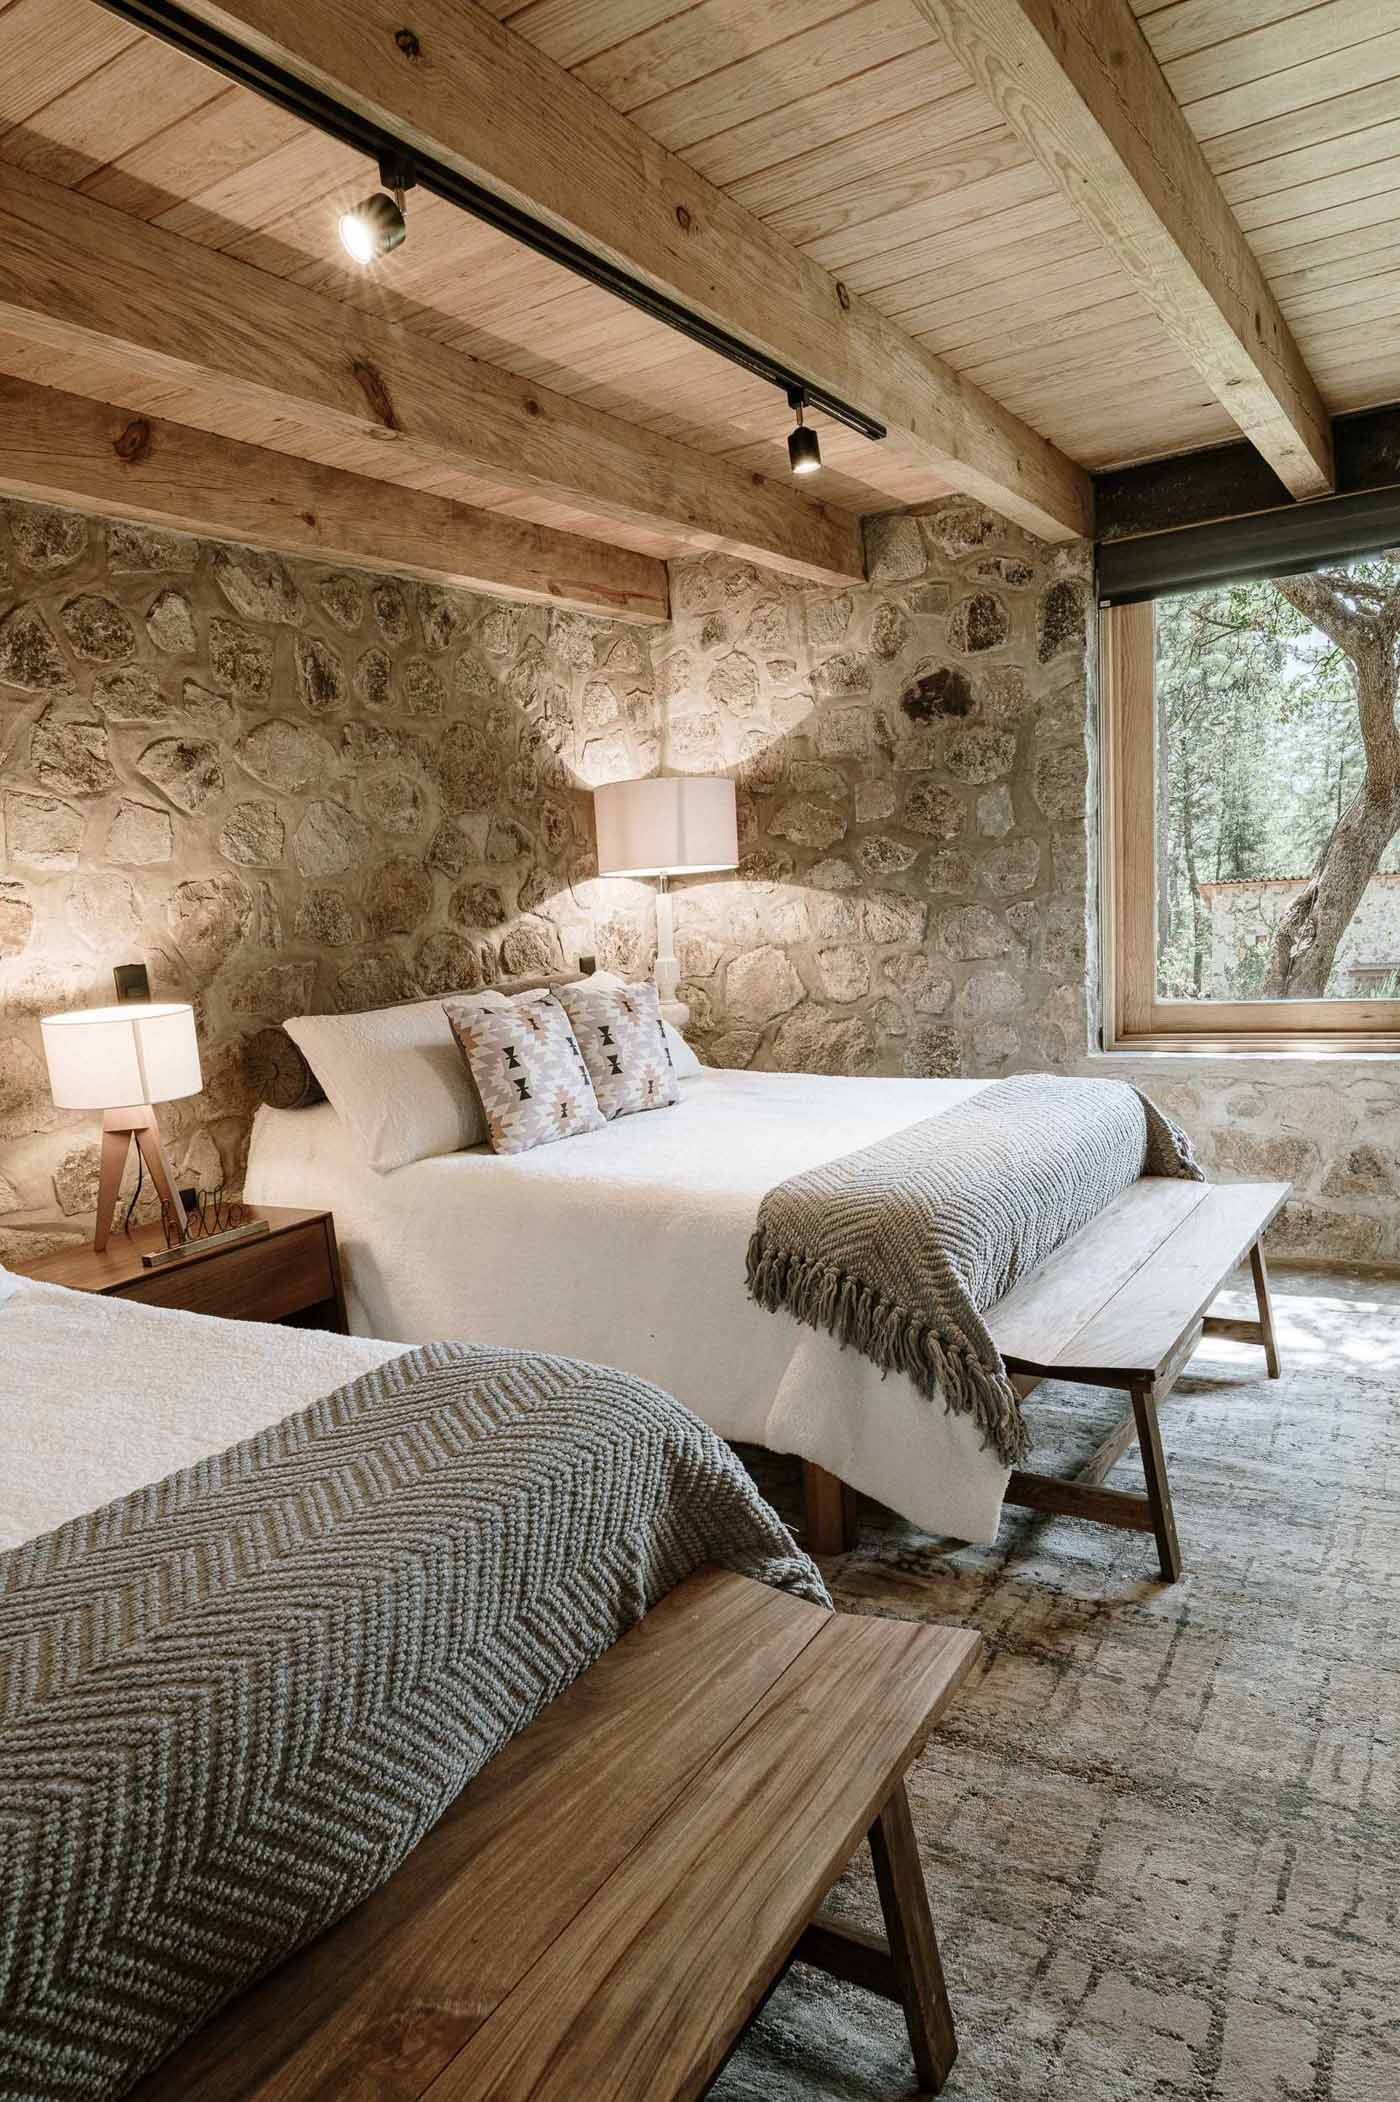 A modern stone and wood bedroom with two beds and built-in cabinetry.